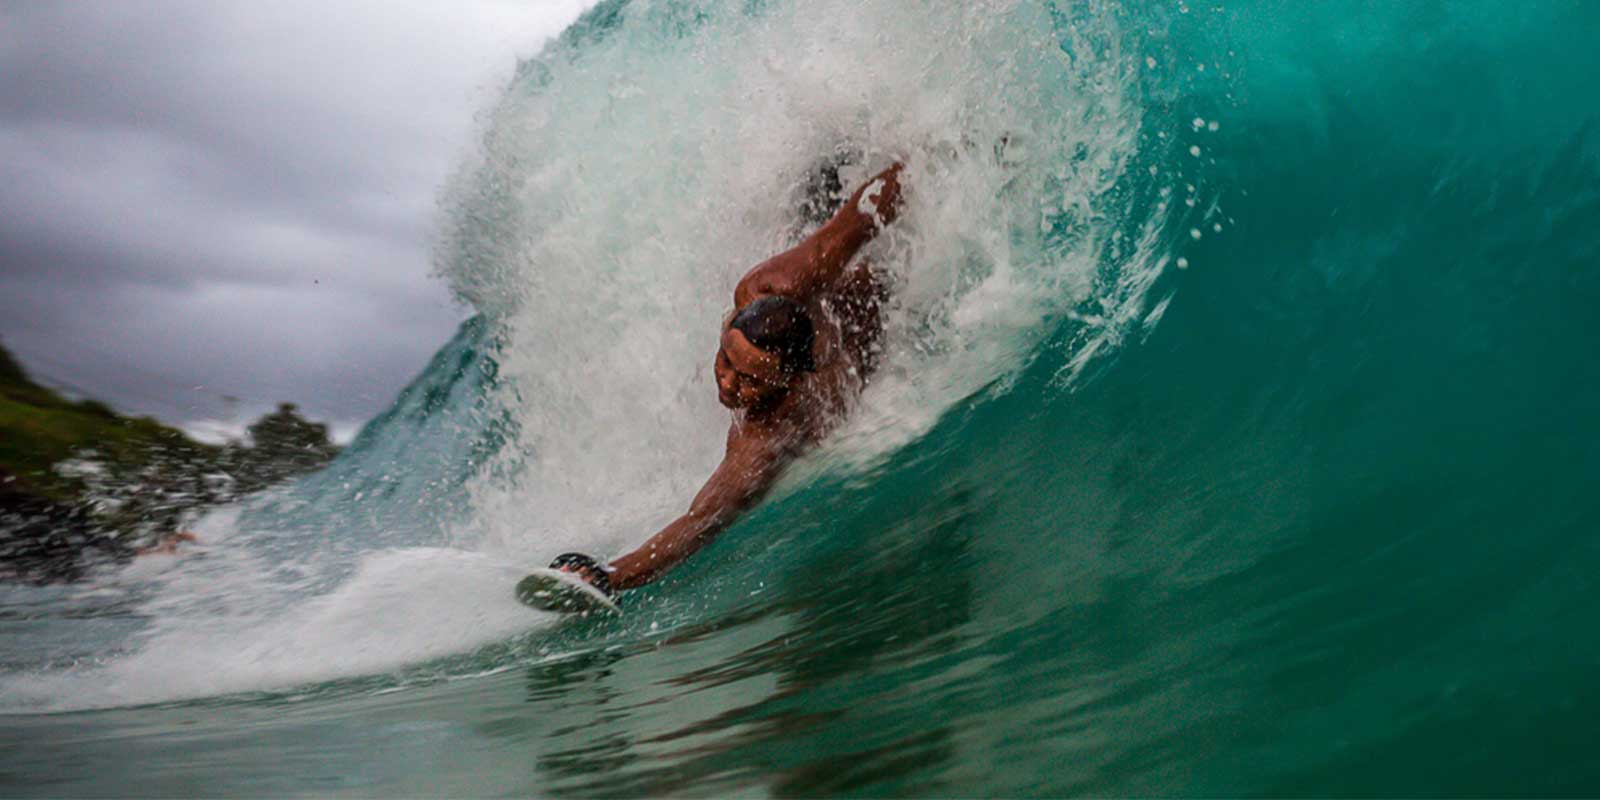 17 Fun Facts You Didn't Know About Slyde Team Rider Kealiʻi Punley